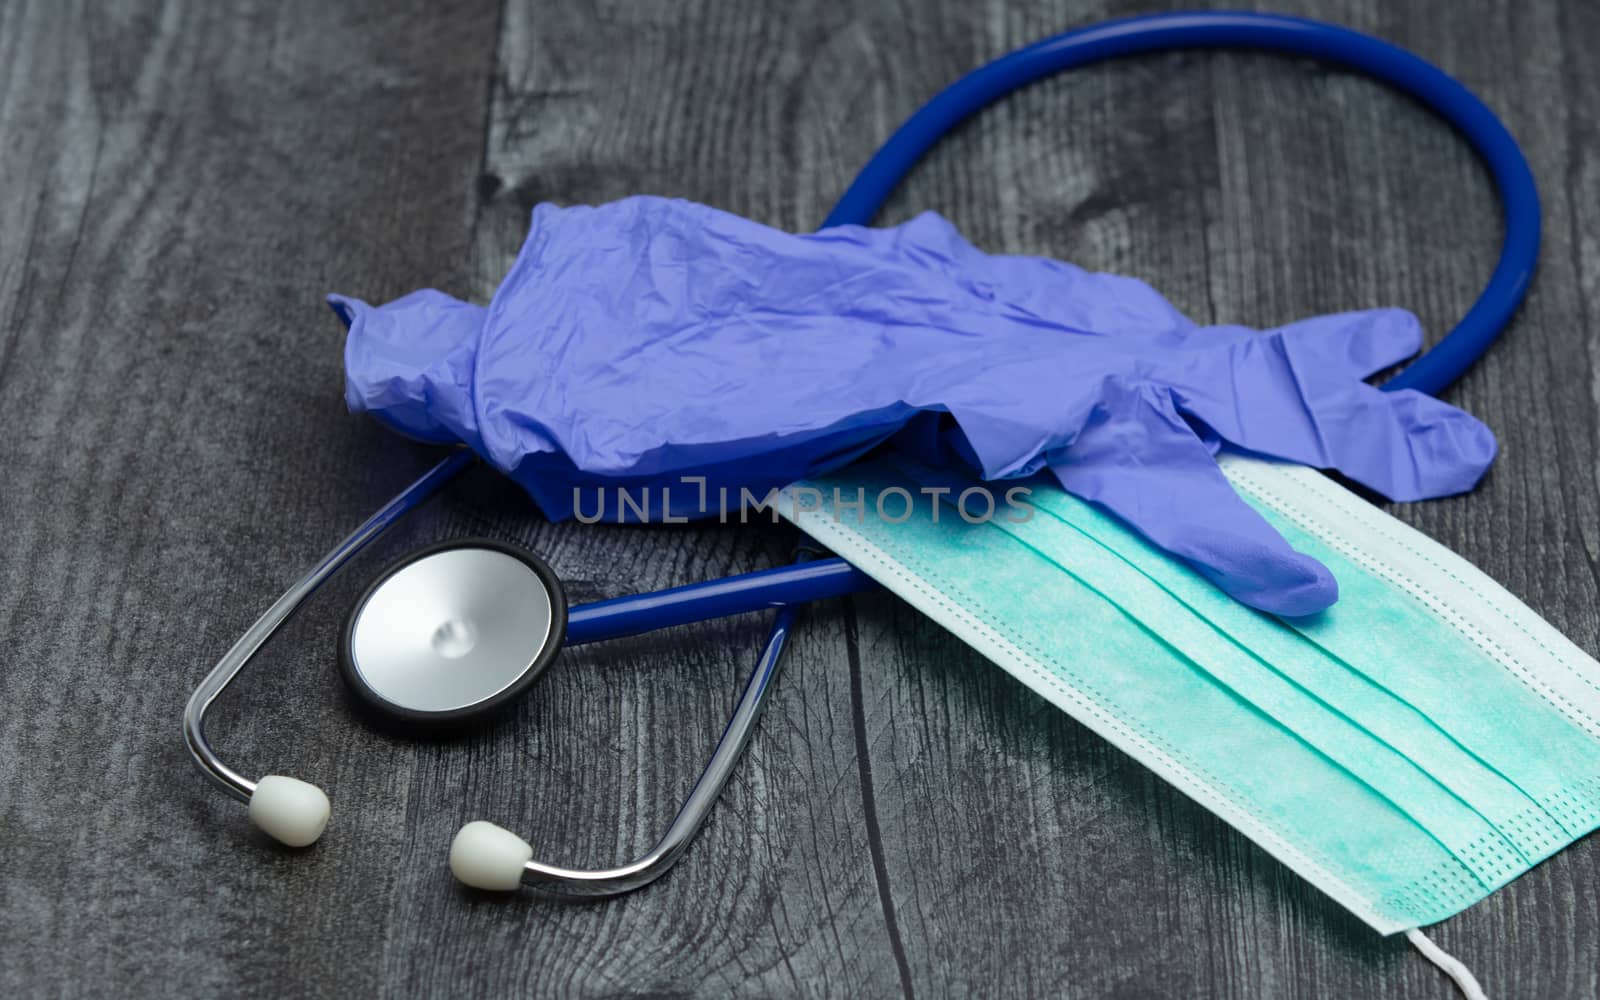 A pair of blue rubber medical gloves, surgical mask and blue stethoscope on a wooden table.